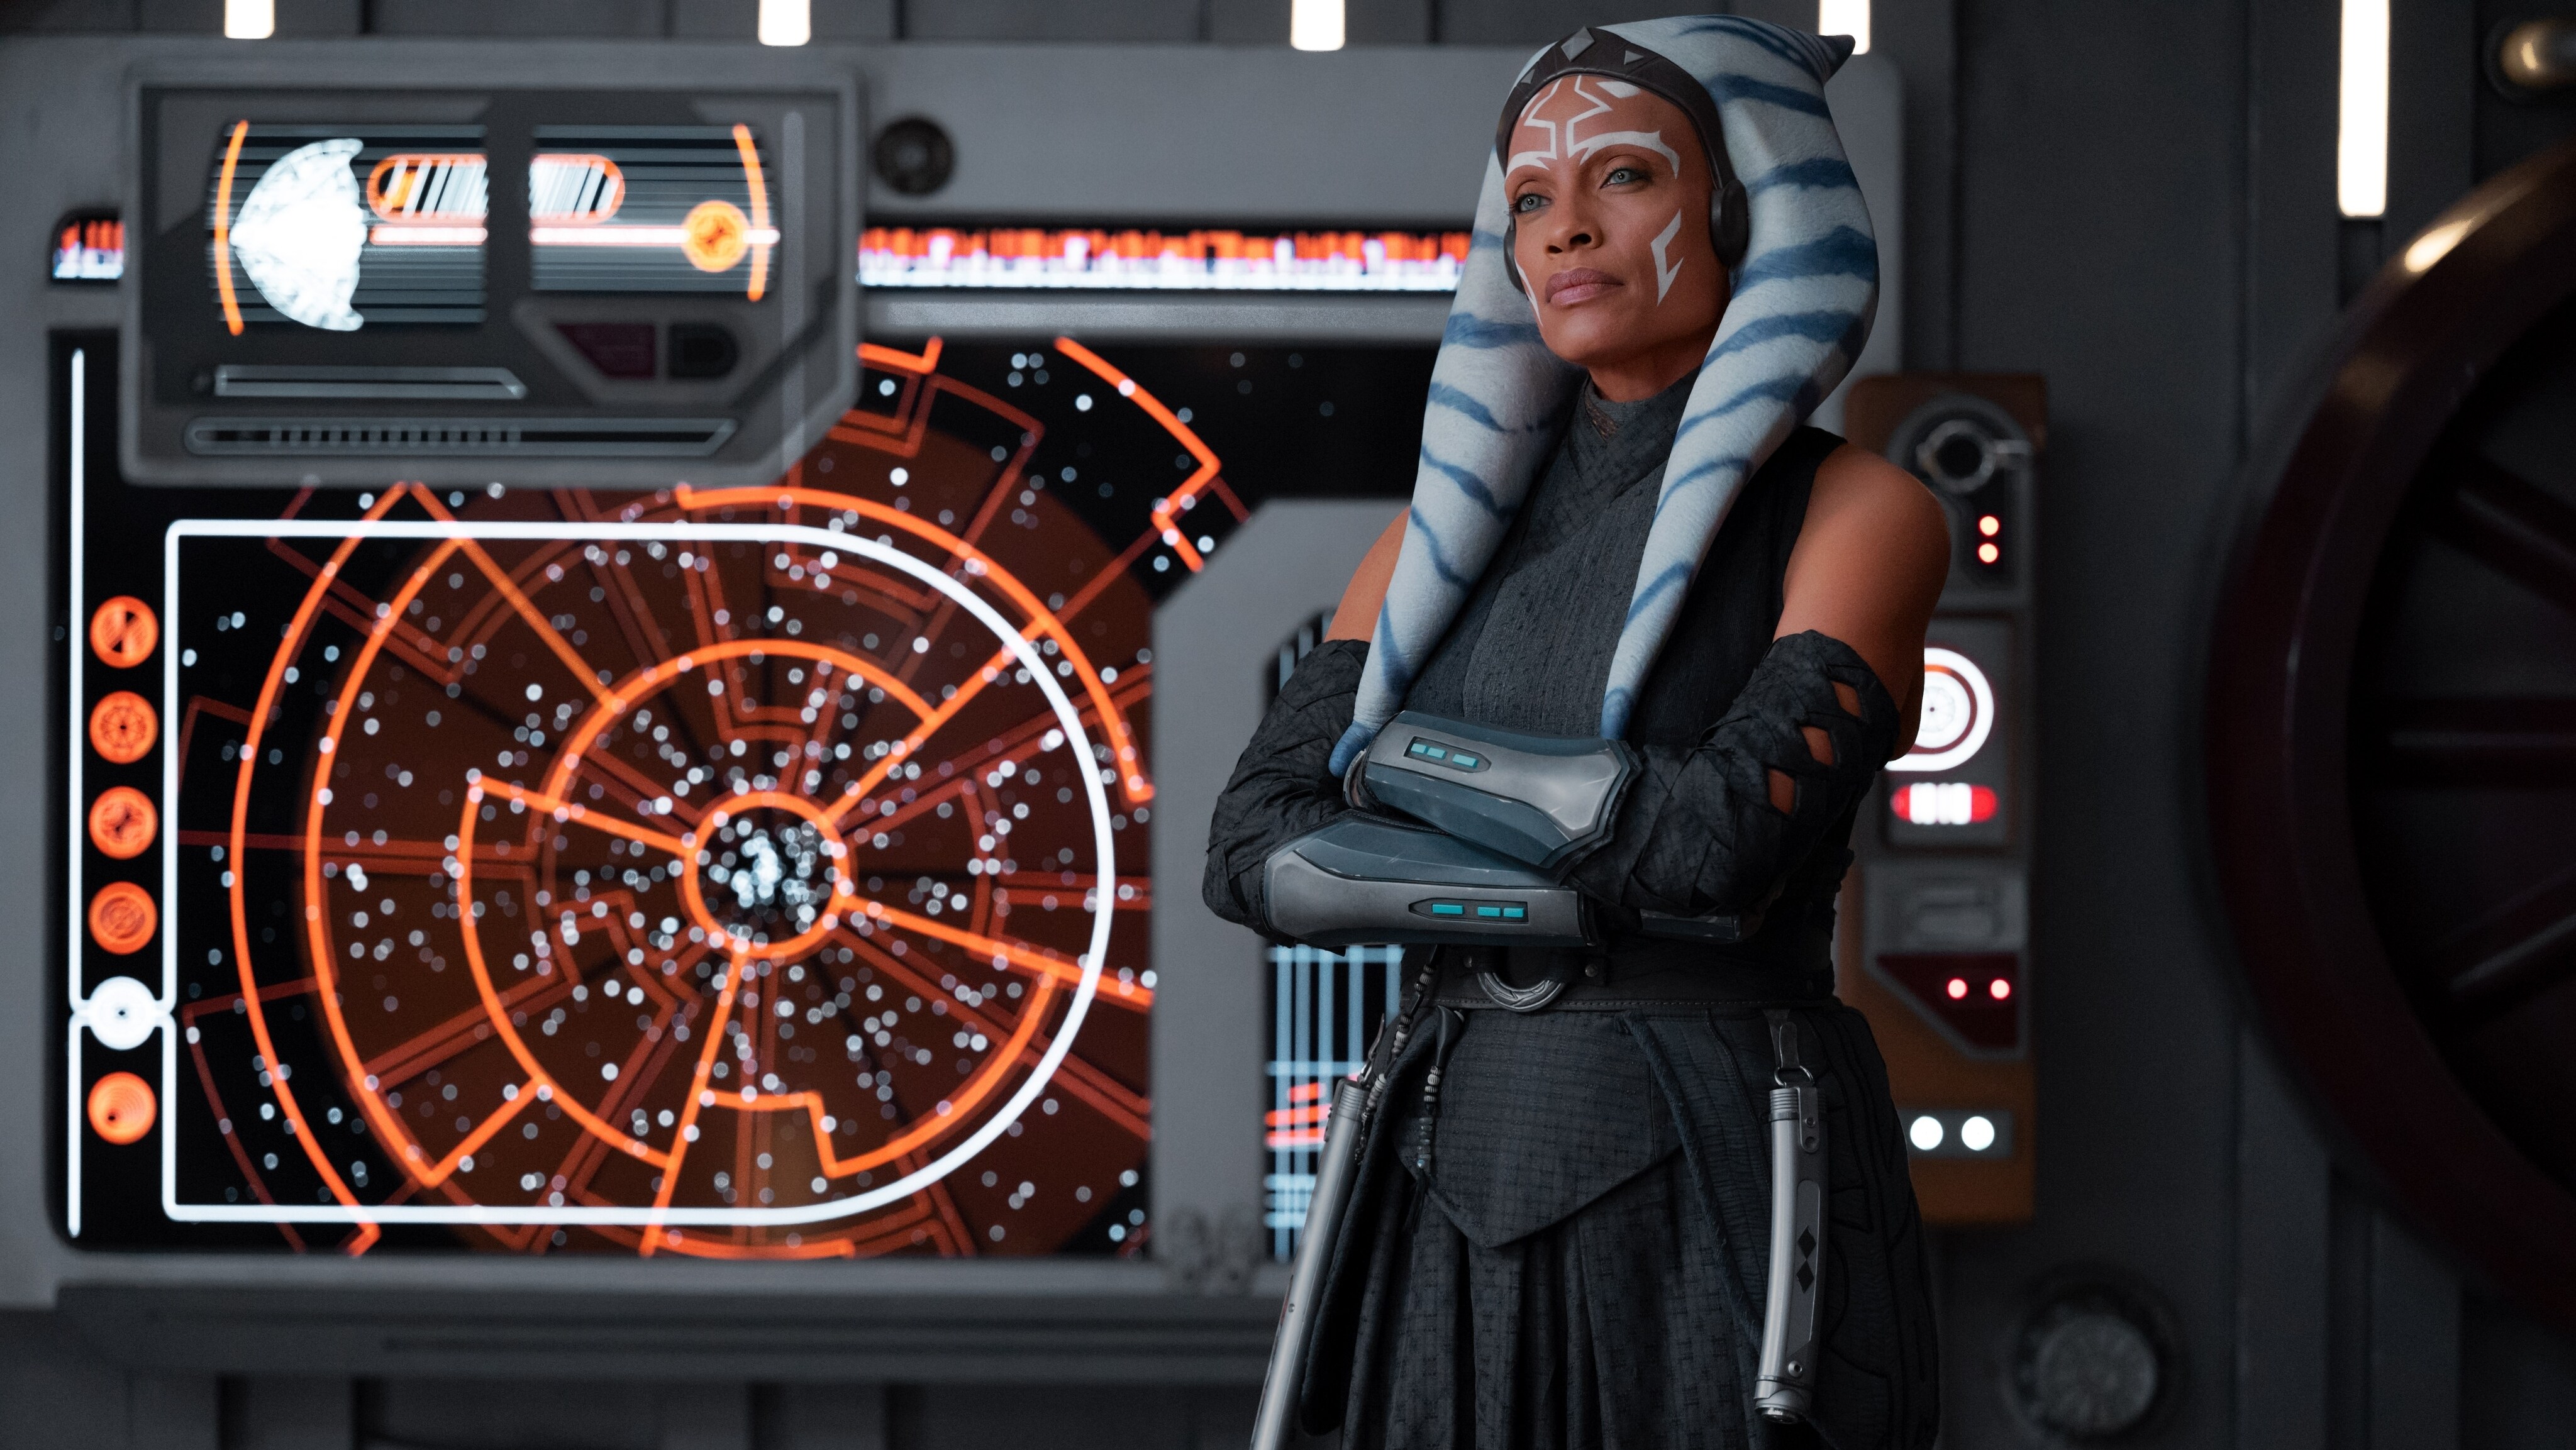 DISNEY+ ANNOUNCES DATE FOR “STAR WARS: AHSOKA”—NEW LIVE-ACTION SERIES FROM LUCASFILM